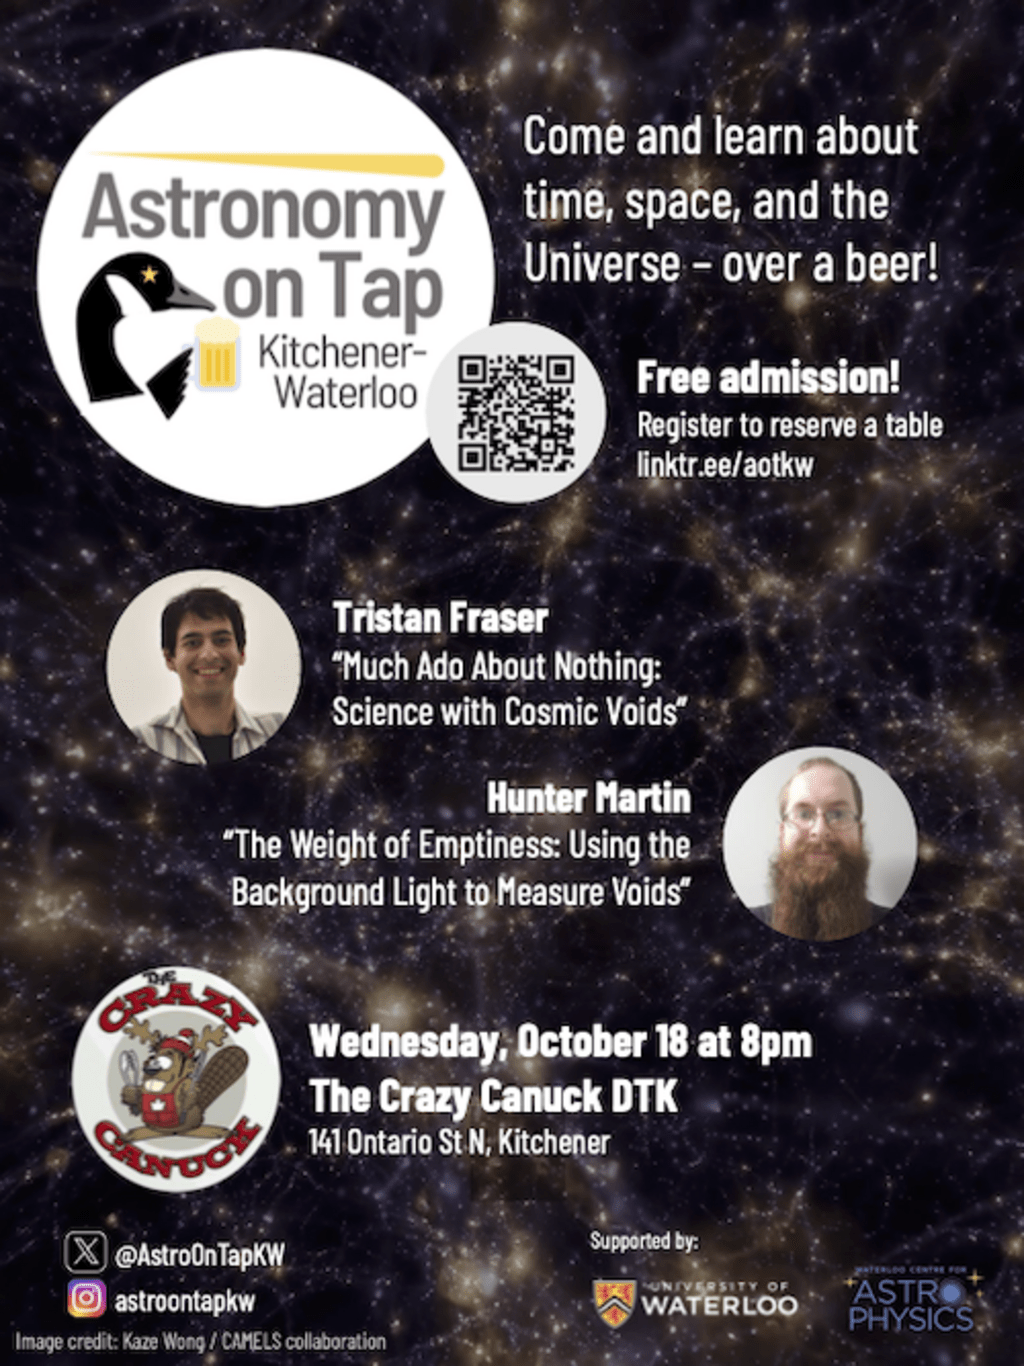 Astronomy on Taon Tap poster October